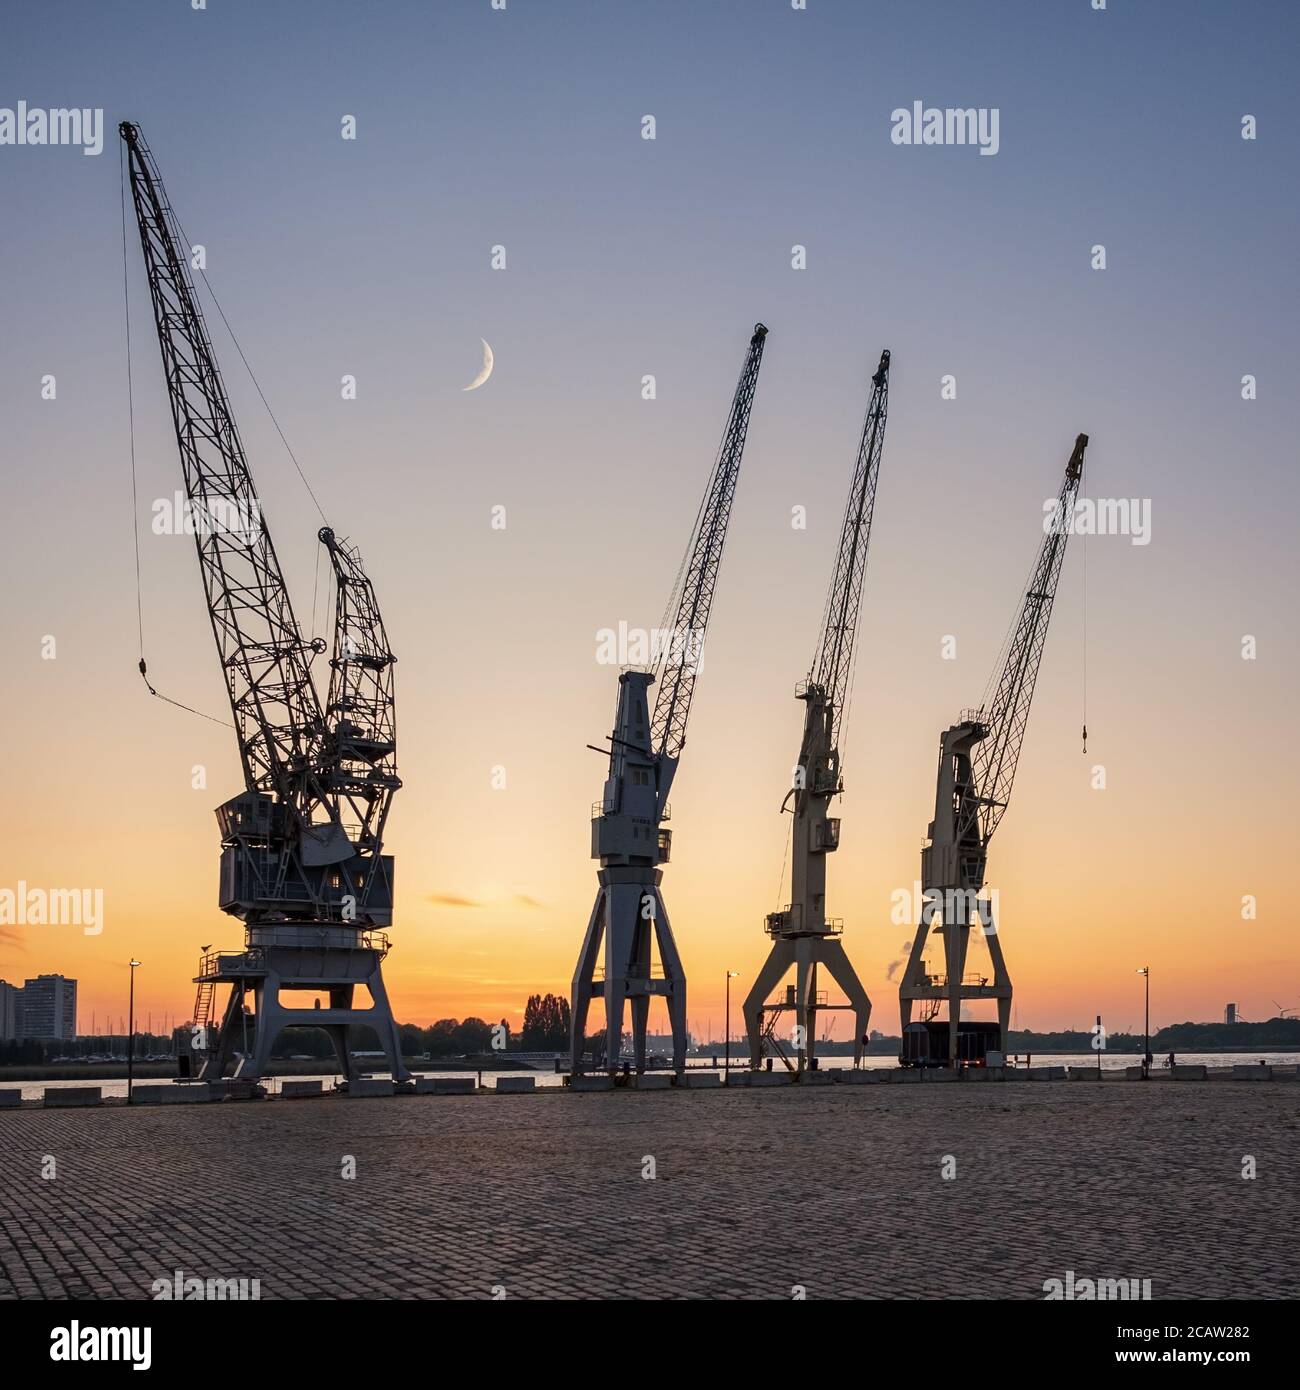 Old harbor crane silhouettes under a crescent moon. The cranes are part of the collection of the MAS museum. Stock Photo